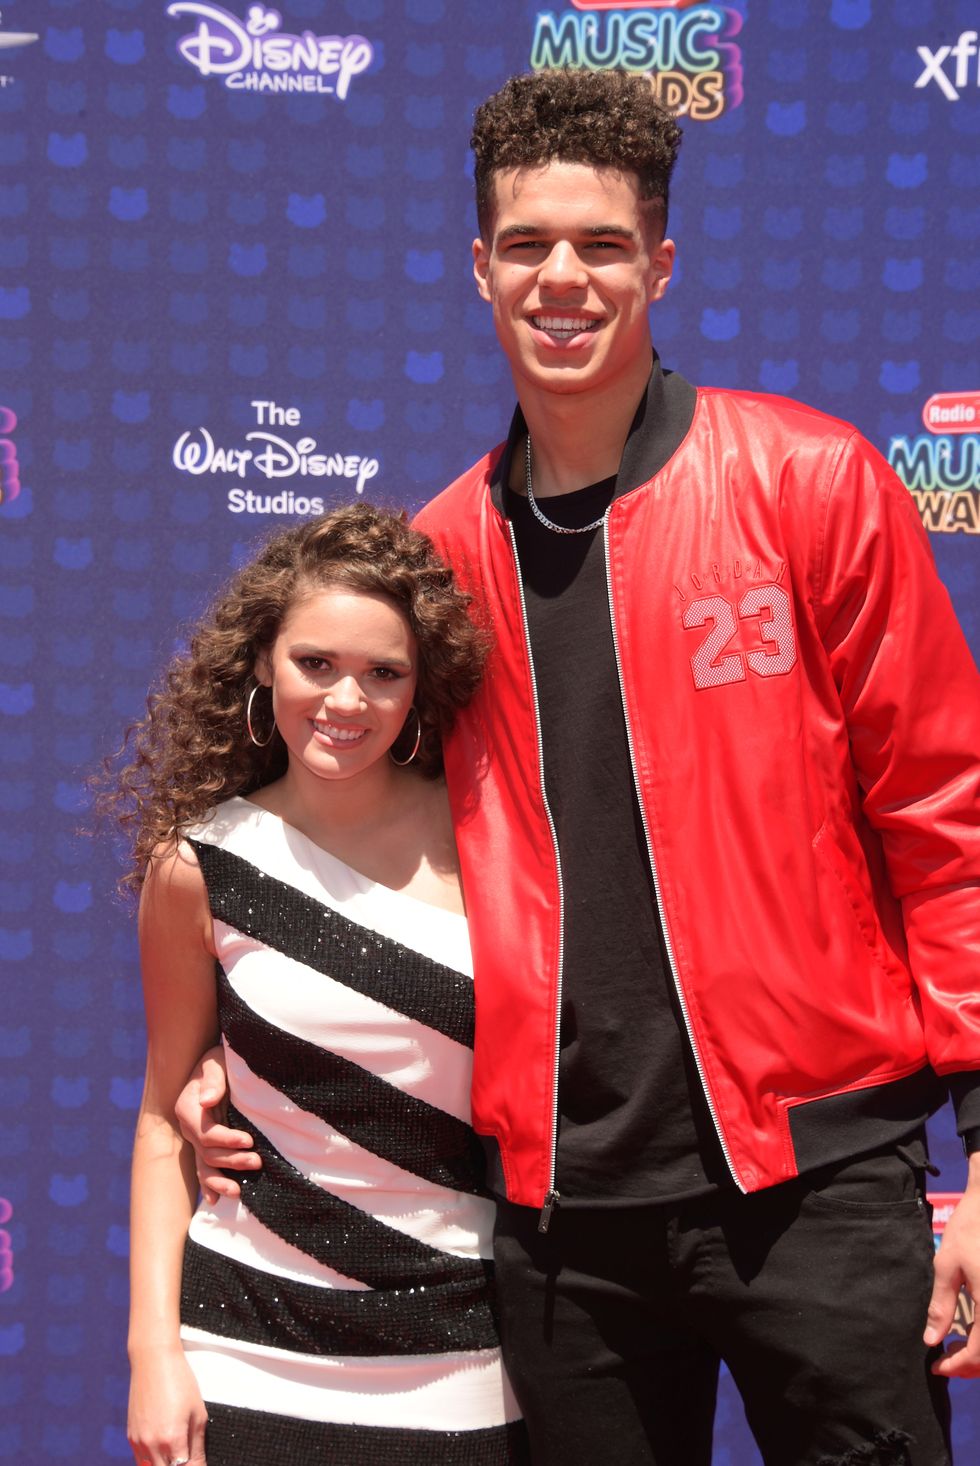 'He's All That's Madison Pettis' Boyfriend, Exes, Dating History